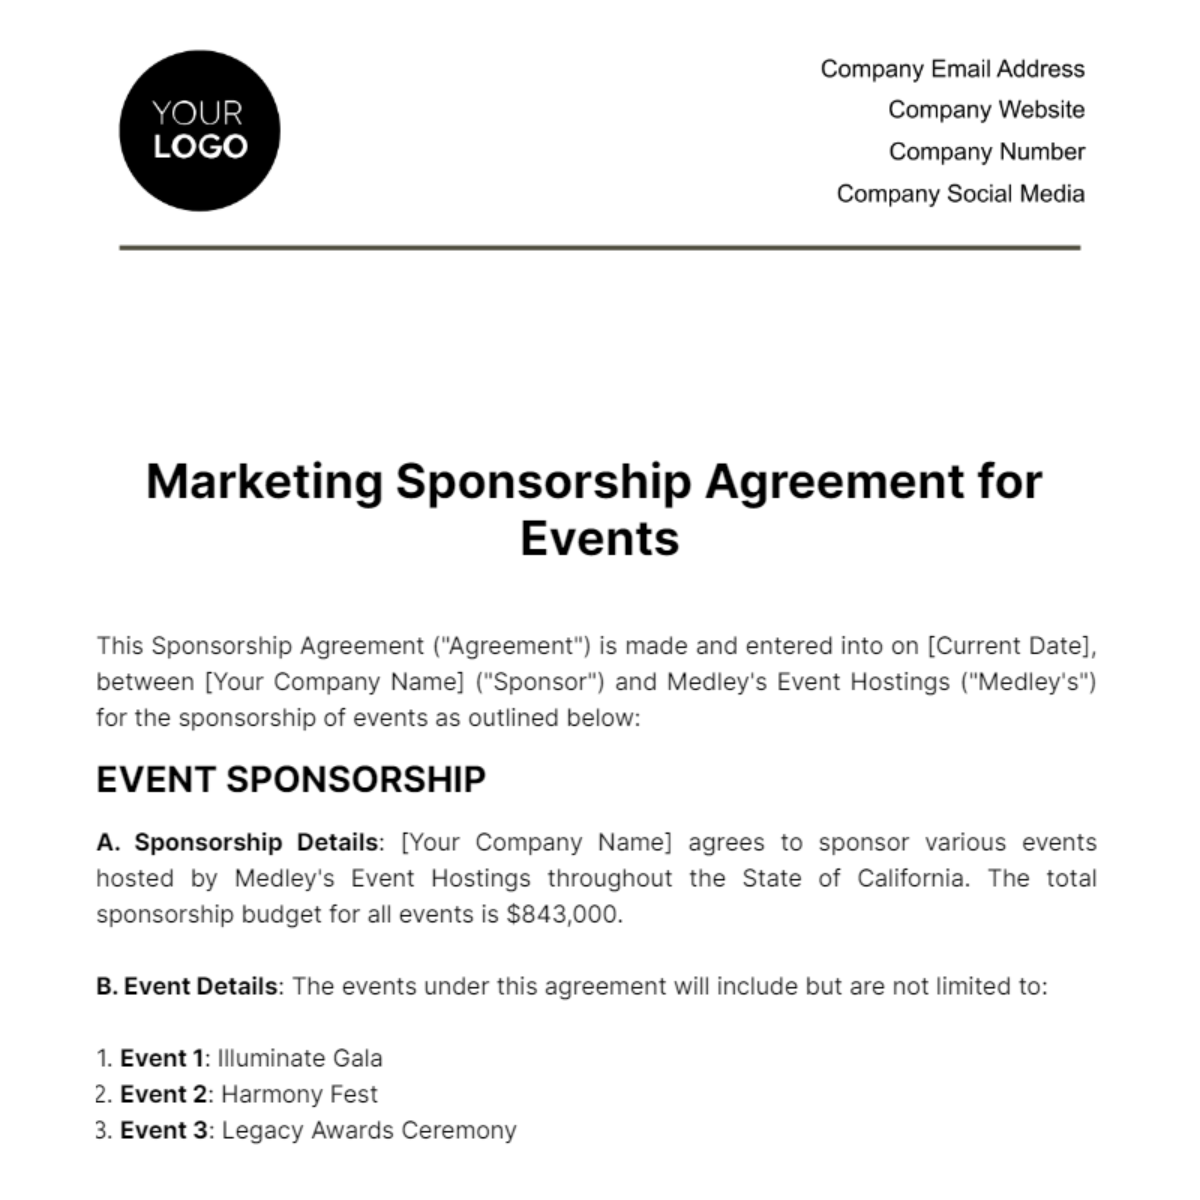 Free Marketing Sponsorship Agreement for Events Template